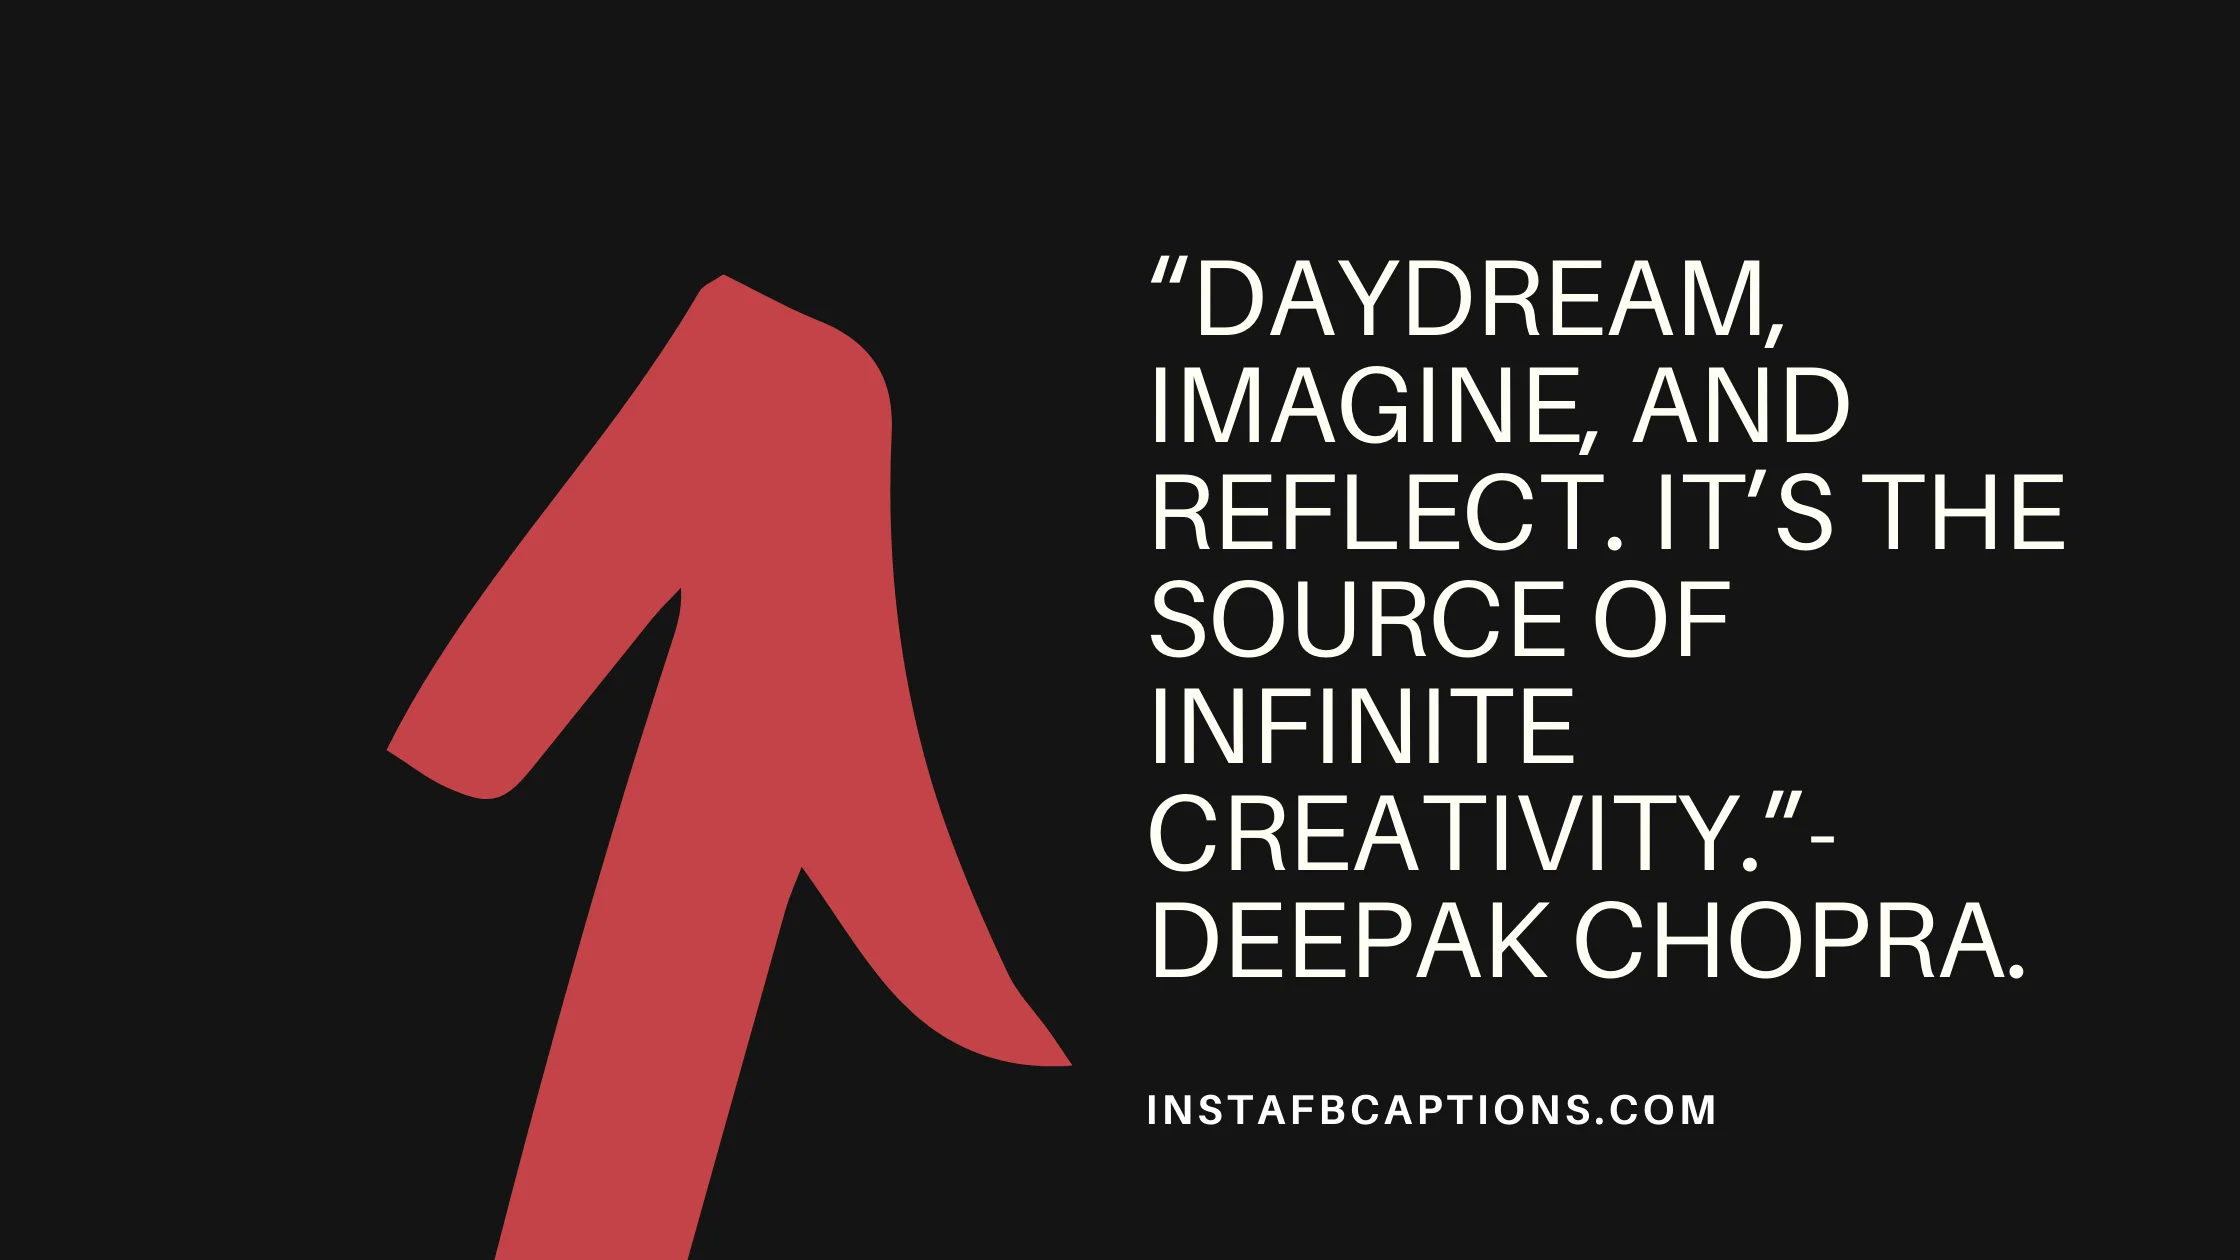 "Daydream, imagine, and reflect. It’s the source of infinite creativity." - Deepak Chopra  - Daydream Quotes - Dreamy Delights: Enchanting Captions &#038; Quotes for Instagram in 2023